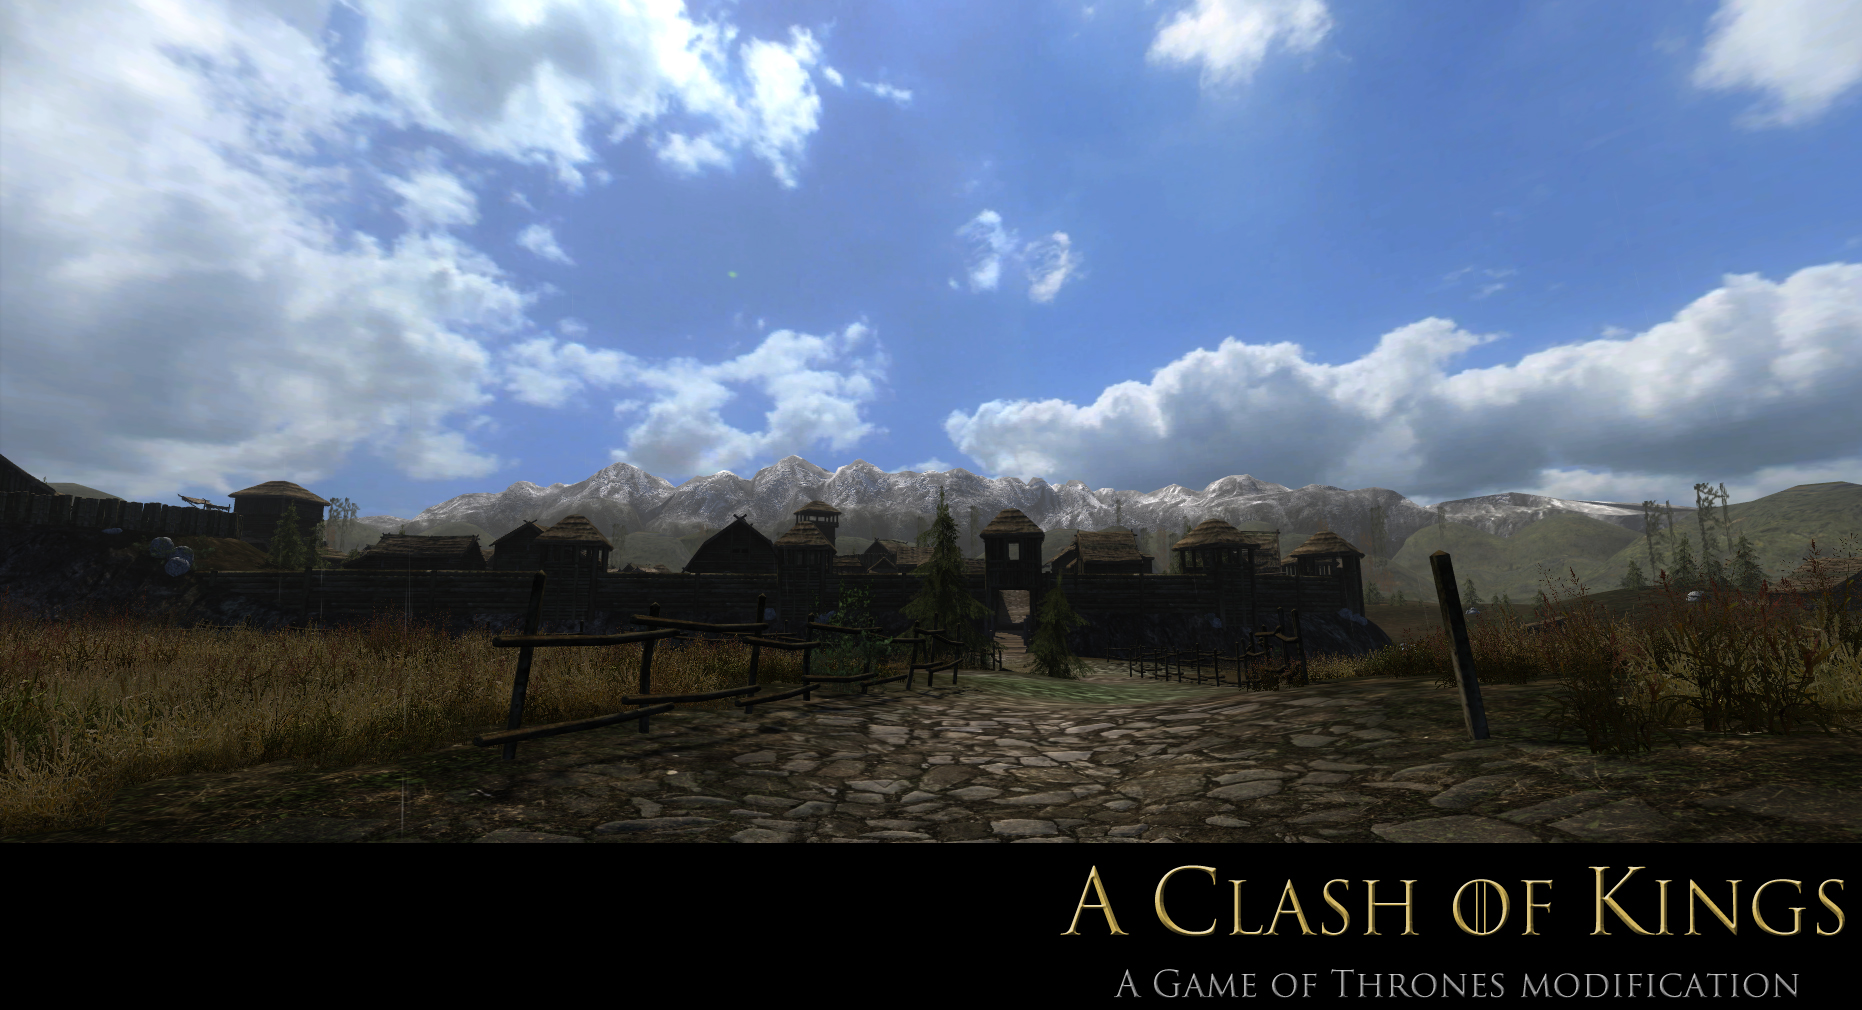 A Clash of Kings 1.11 - Mount & Blade: Warband Mods